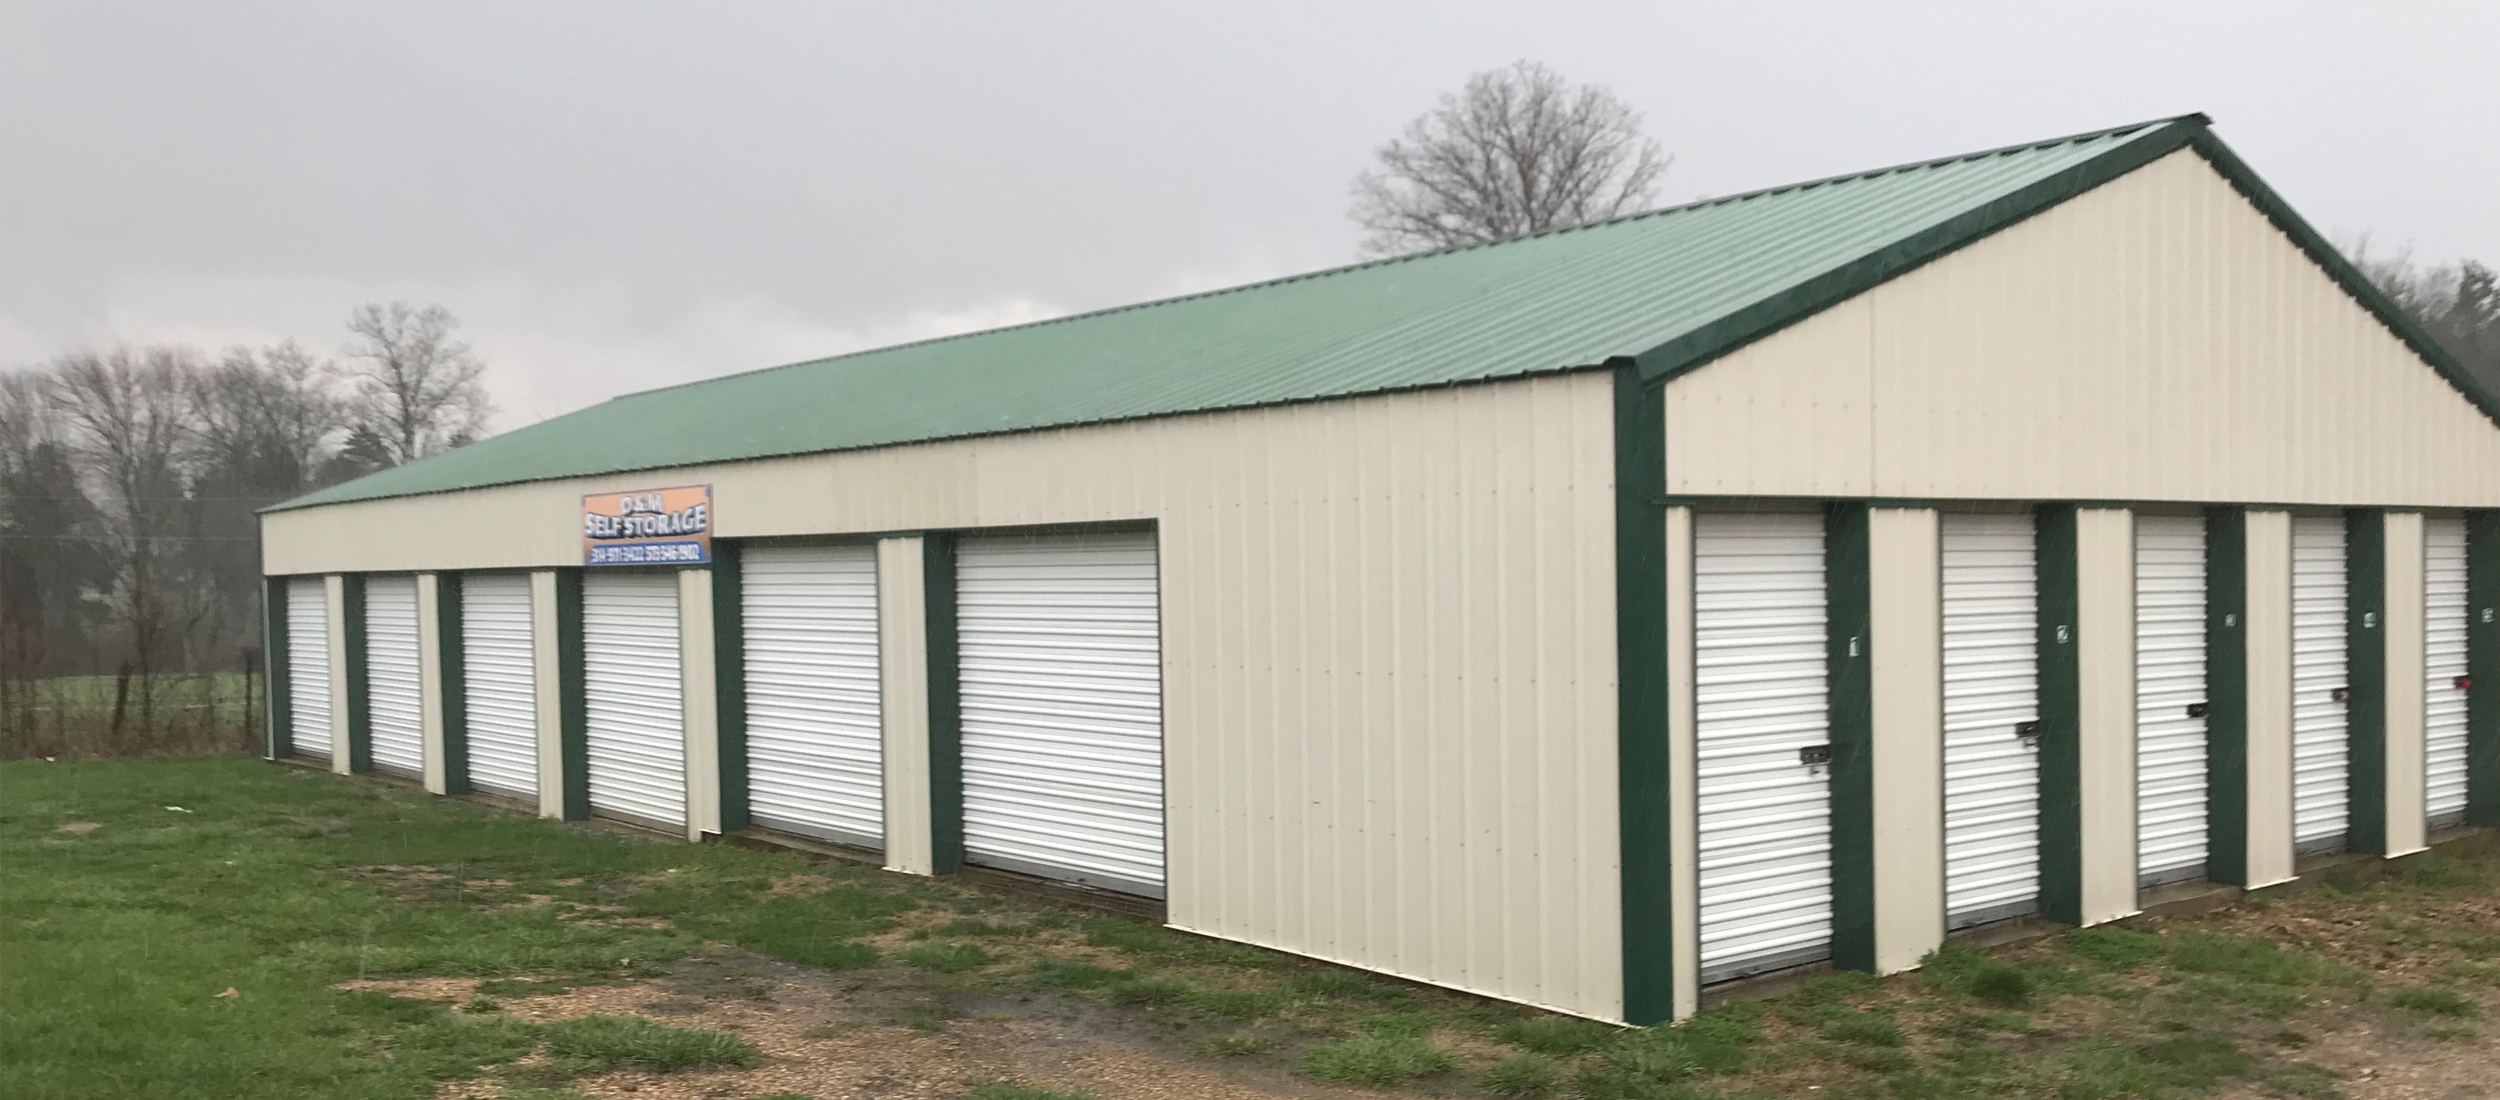 single building with multiple storage units